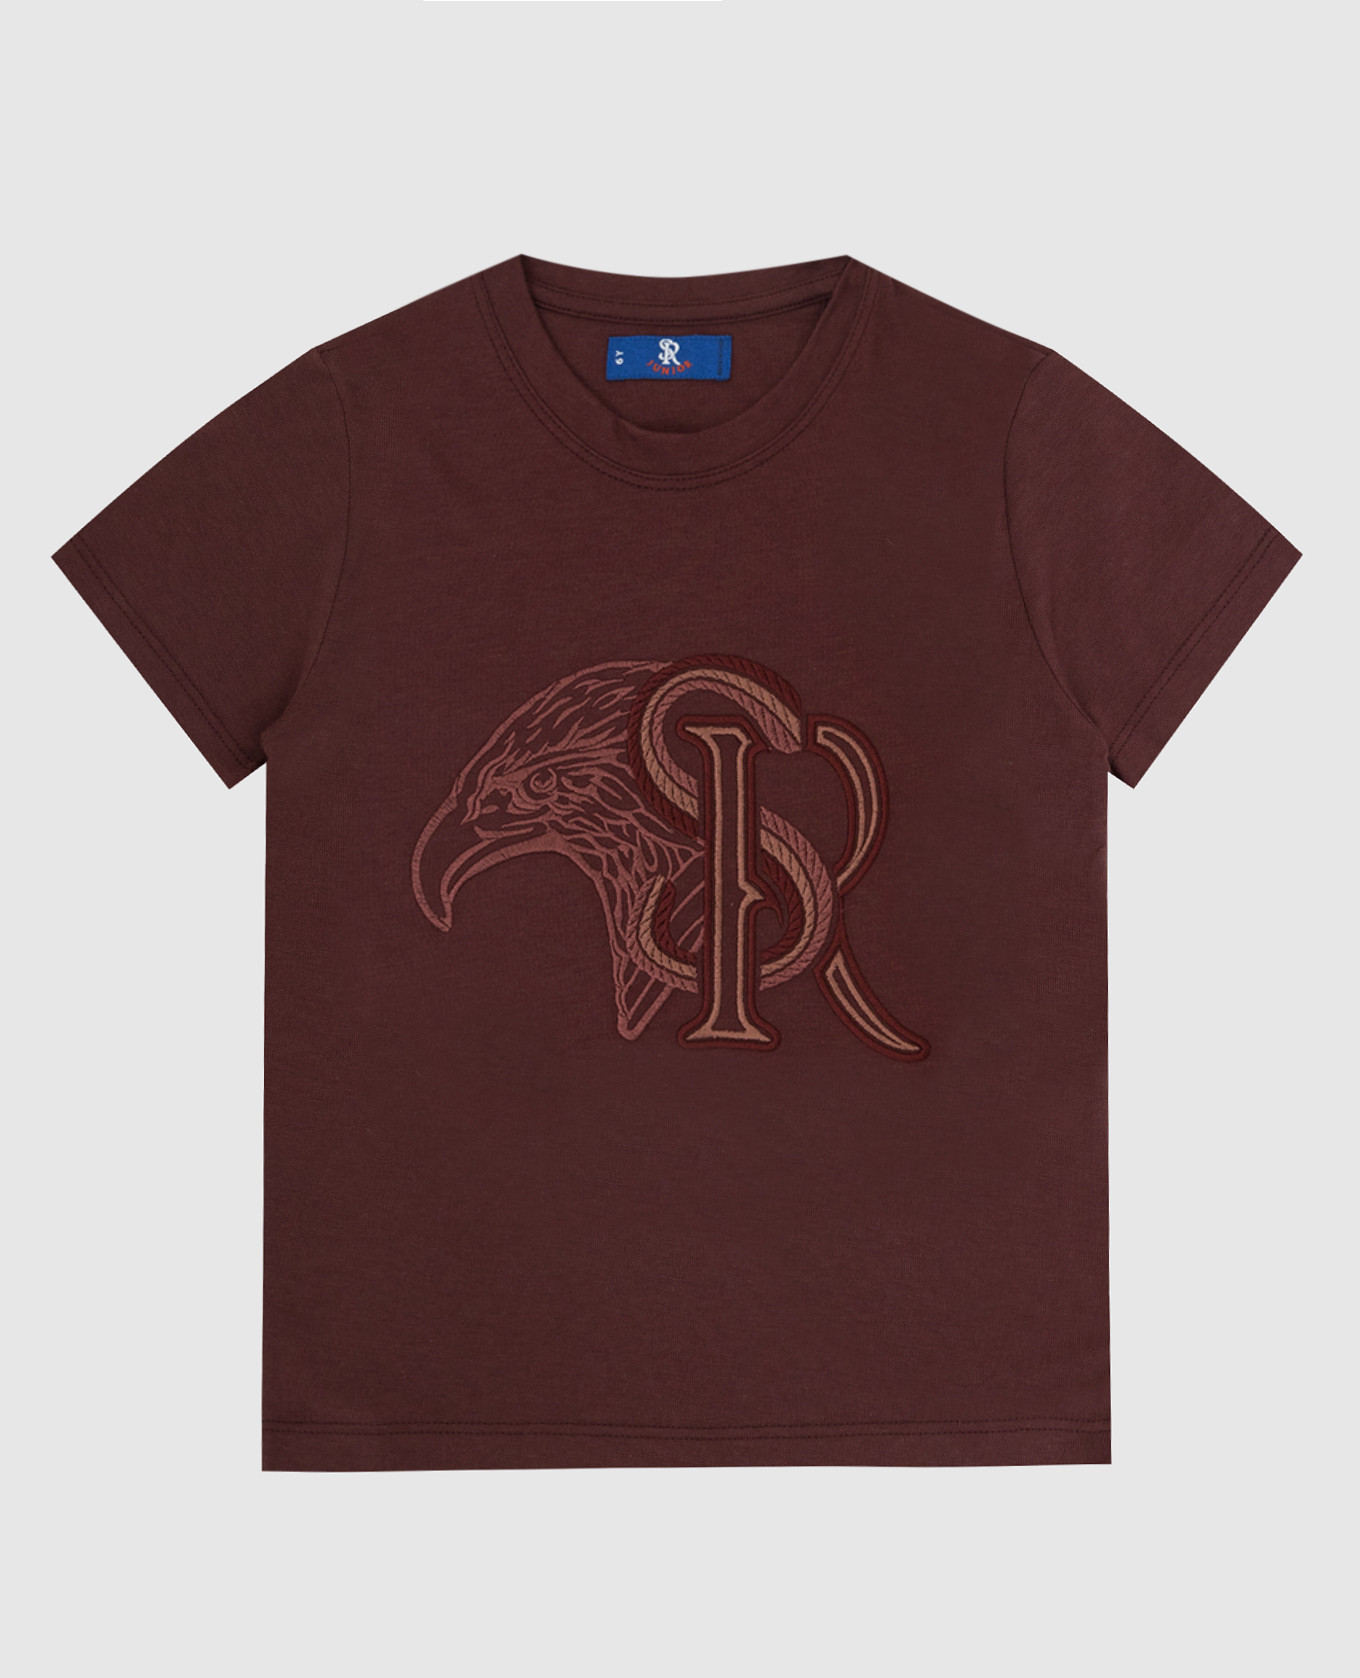 Children's brown T-shirt with logo embroidery